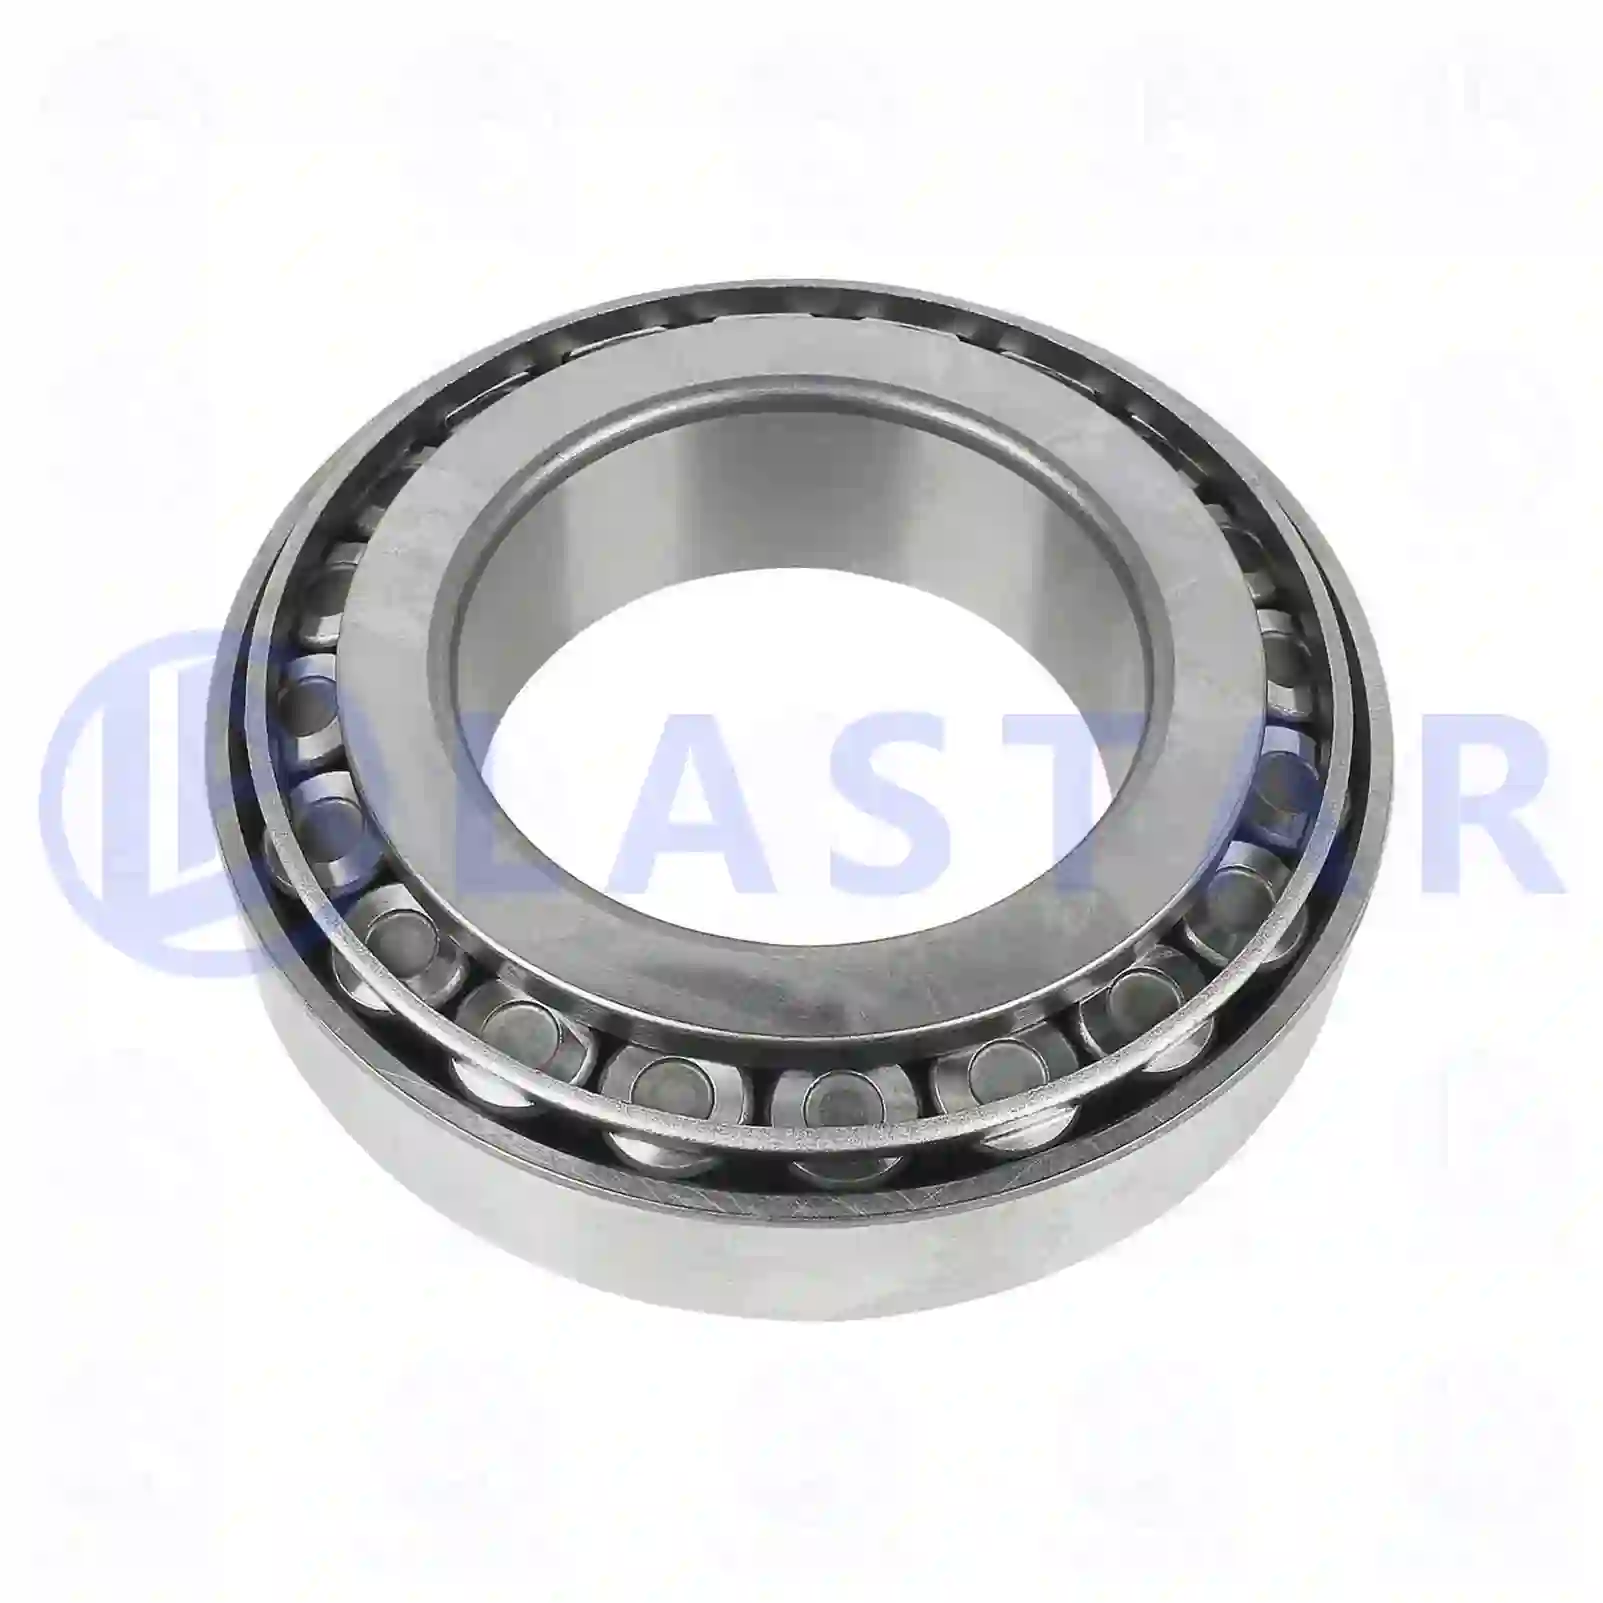 Tapered roller bearing, 77726329, 21040T, 07164544, 26800230, 988485104, 988485104A, 00914219, 01102862, 01905354, 07164544, 1905354, 26800230, 3612948500, 06324901600, 06324990007, 34934200004, 64934200101, 87523301210, 0009812205, 0029811705, 0029811805, 3279810405, 3279812205, MS556521, 40209-90000, 0023432217, 0959232217, 5000020511, 7401524857, 4200002500, 8064032217, 14146, EN568103, 97600-32217, 1524857, ZG03008-0008 ||  77726329 Lastar Spare Part | Truck Spare Parts, Auotomotive Spare Parts Tapered roller bearing, 77726329, 21040T, 07164544, 26800230, 988485104, 988485104A, 00914219, 01102862, 01905354, 07164544, 1905354, 26800230, 3612948500, 06324901600, 06324990007, 34934200004, 64934200101, 87523301210, 0009812205, 0029811705, 0029811805, 3279810405, 3279812205, MS556521, 40209-90000, 0023432217, 0959232217, 5000020511, 7401524857, 4200002500, 8064032217, 14146, EN568103, 97600-32217, 1524857, ZG03008-0008 ||  77726329 Lastar Spare Part | Truck Spare Parts, Auotomotive Spare Parts